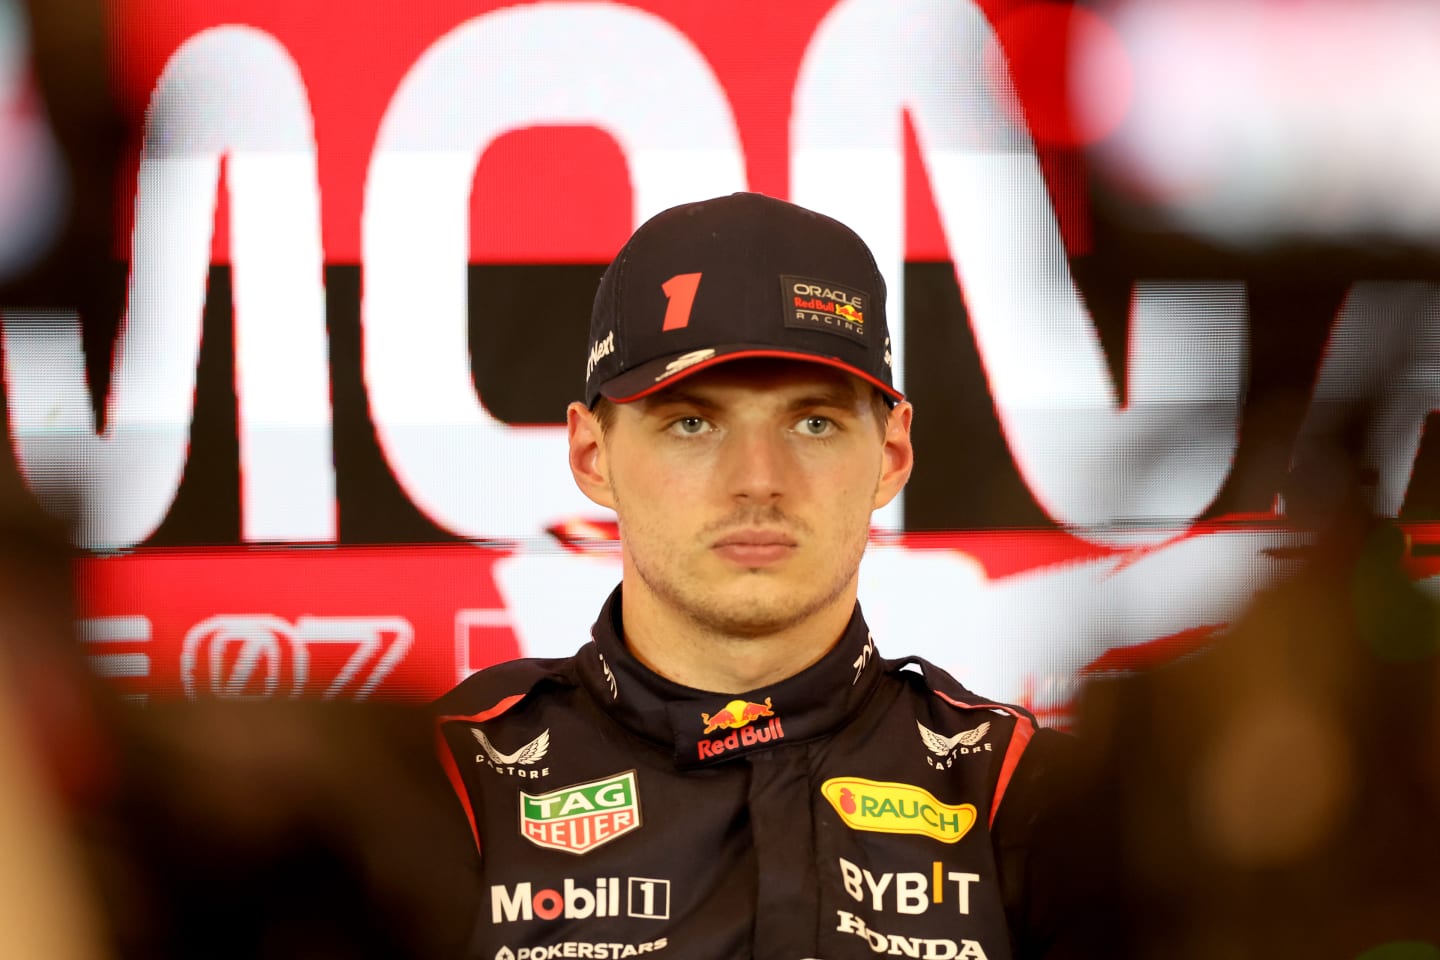 MONTE-CARLO, MONACO - MAY 27: Pole position qualifier Max Verstappen of the Netherlands and Oracle Red Bull Racing attends the press conference after qualifying ahead of the F1 Grand Prix of Monaco at Circuit de Monaco on May 27, 2023 in Monte-Carlo, Monaco. (Photo by Bryn Lennon/Getty Images)